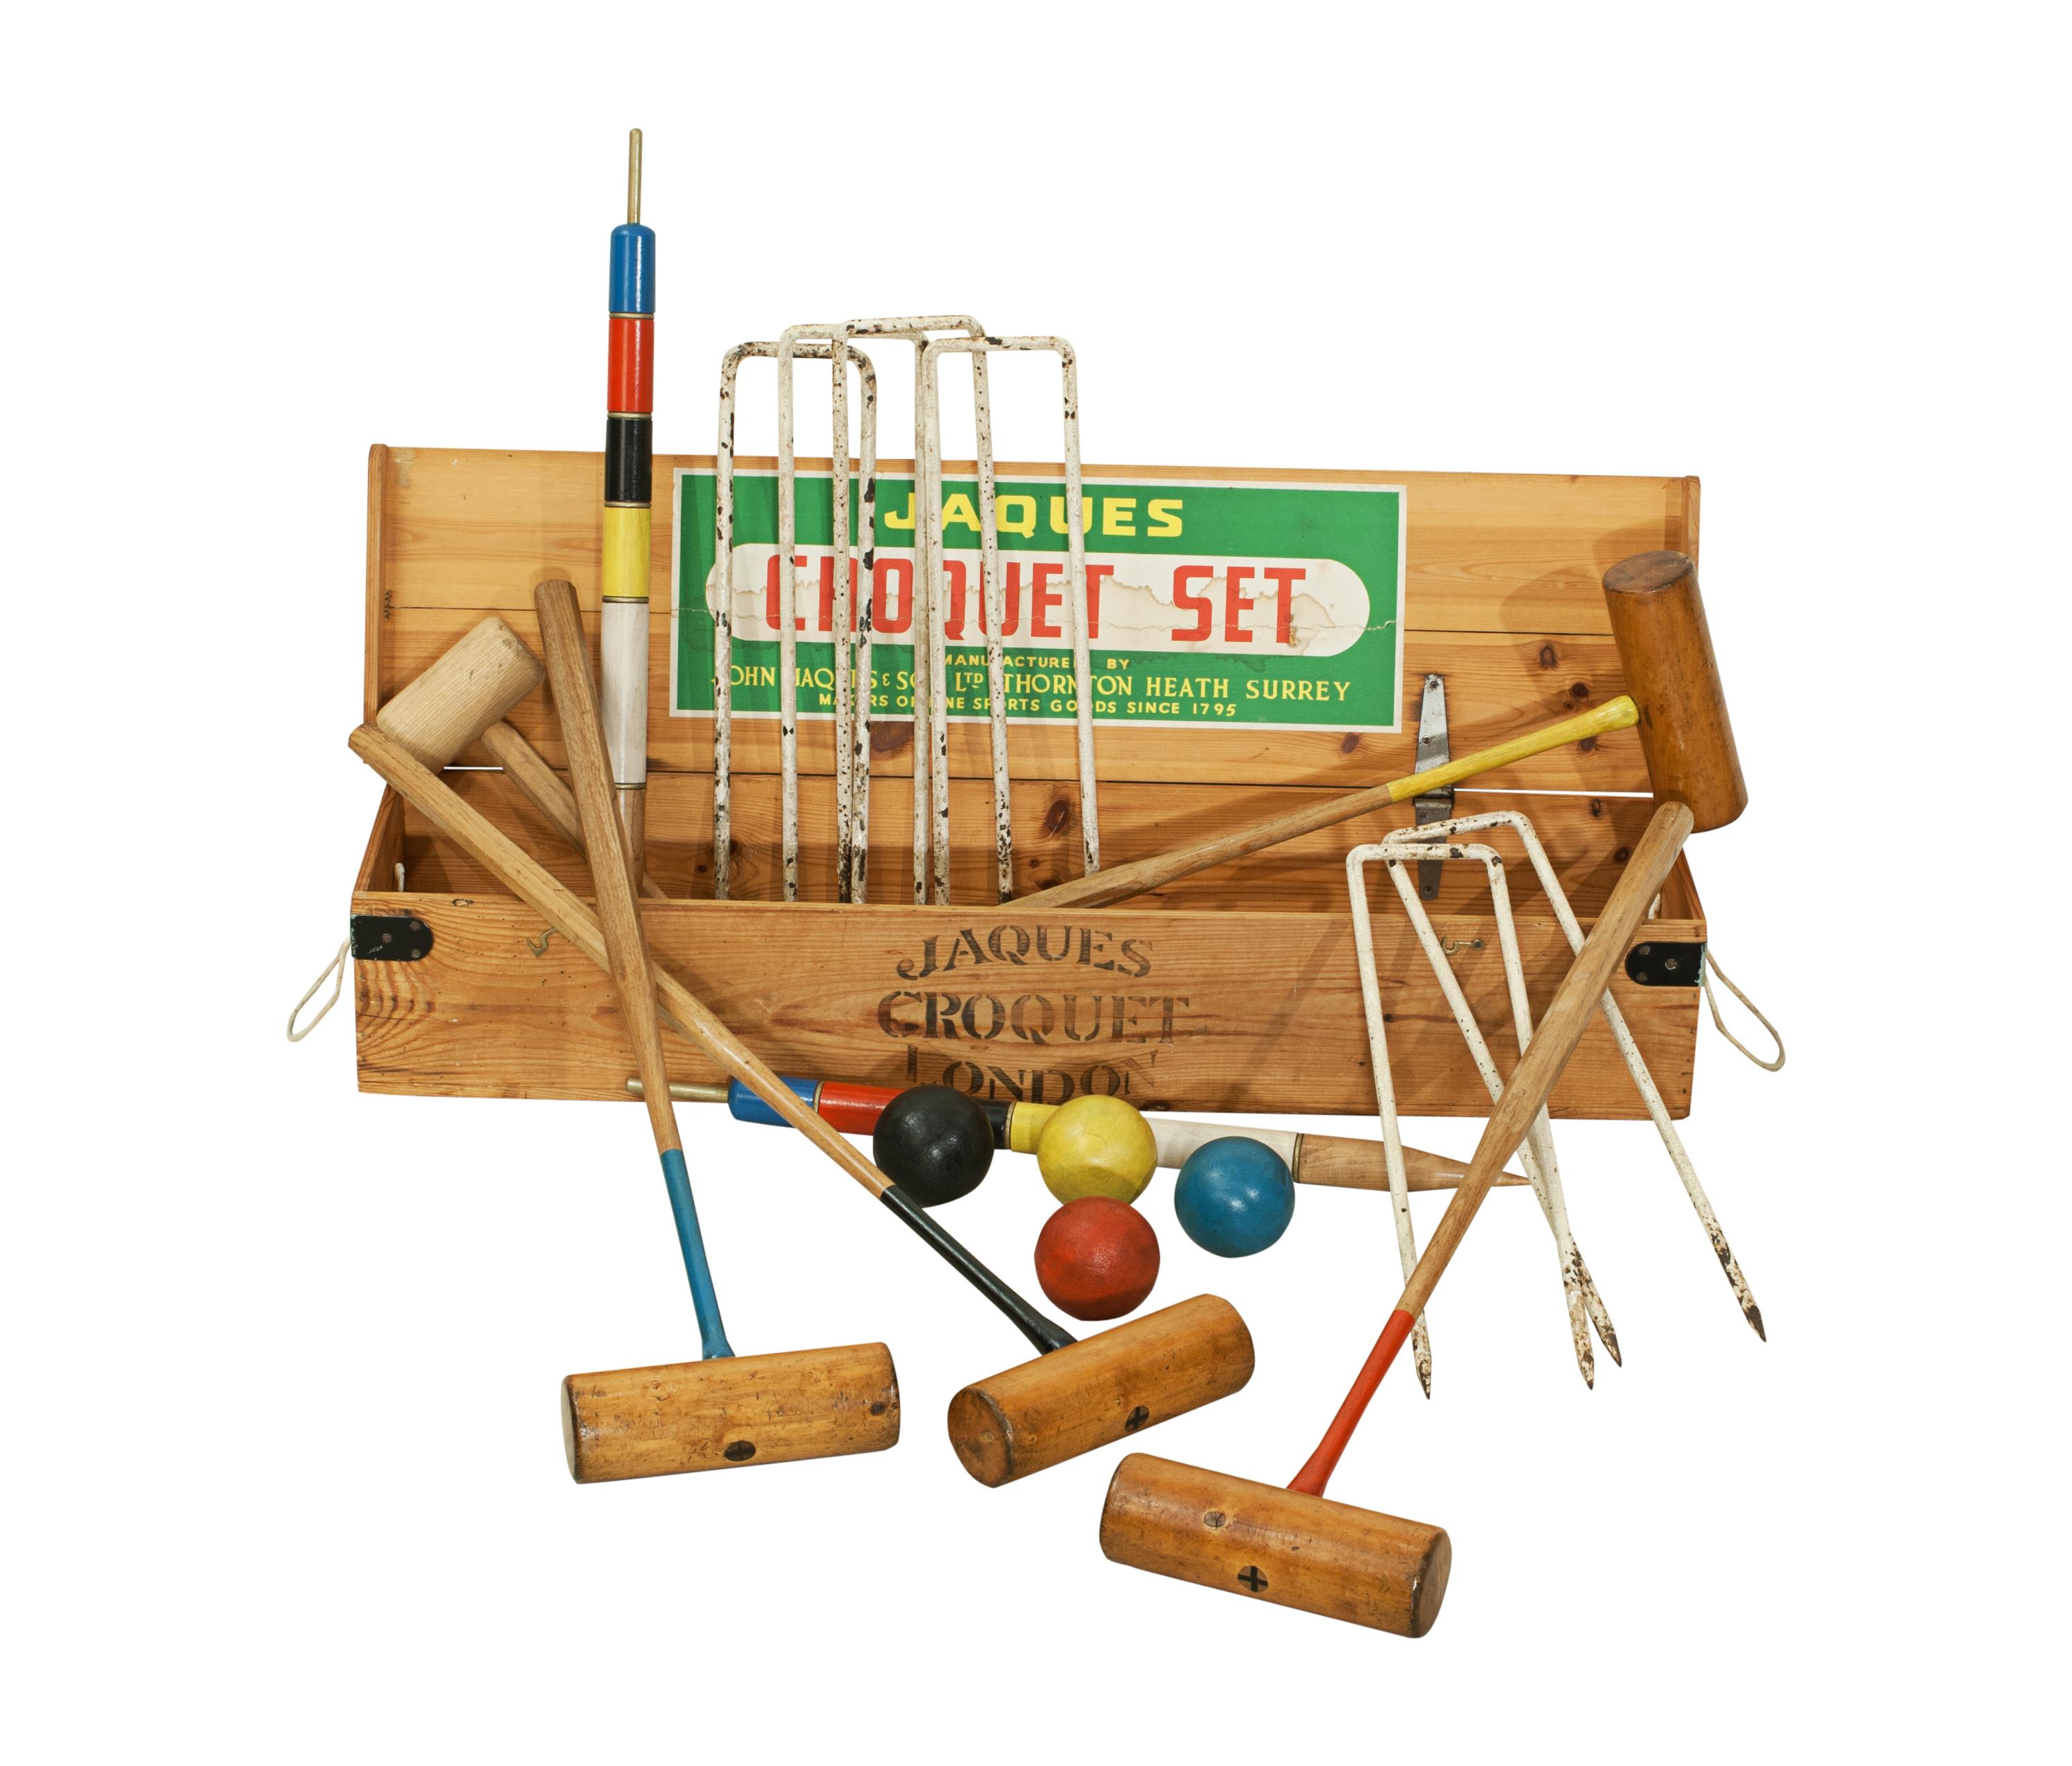 Vintage boxed croquet set.
A good vintage croquet set in a later polished pine box with two carry handles that is stamped 'Jaques' and has a Jacques paper label on the inside of the lid. The set comes with four box wood croquet mallets with